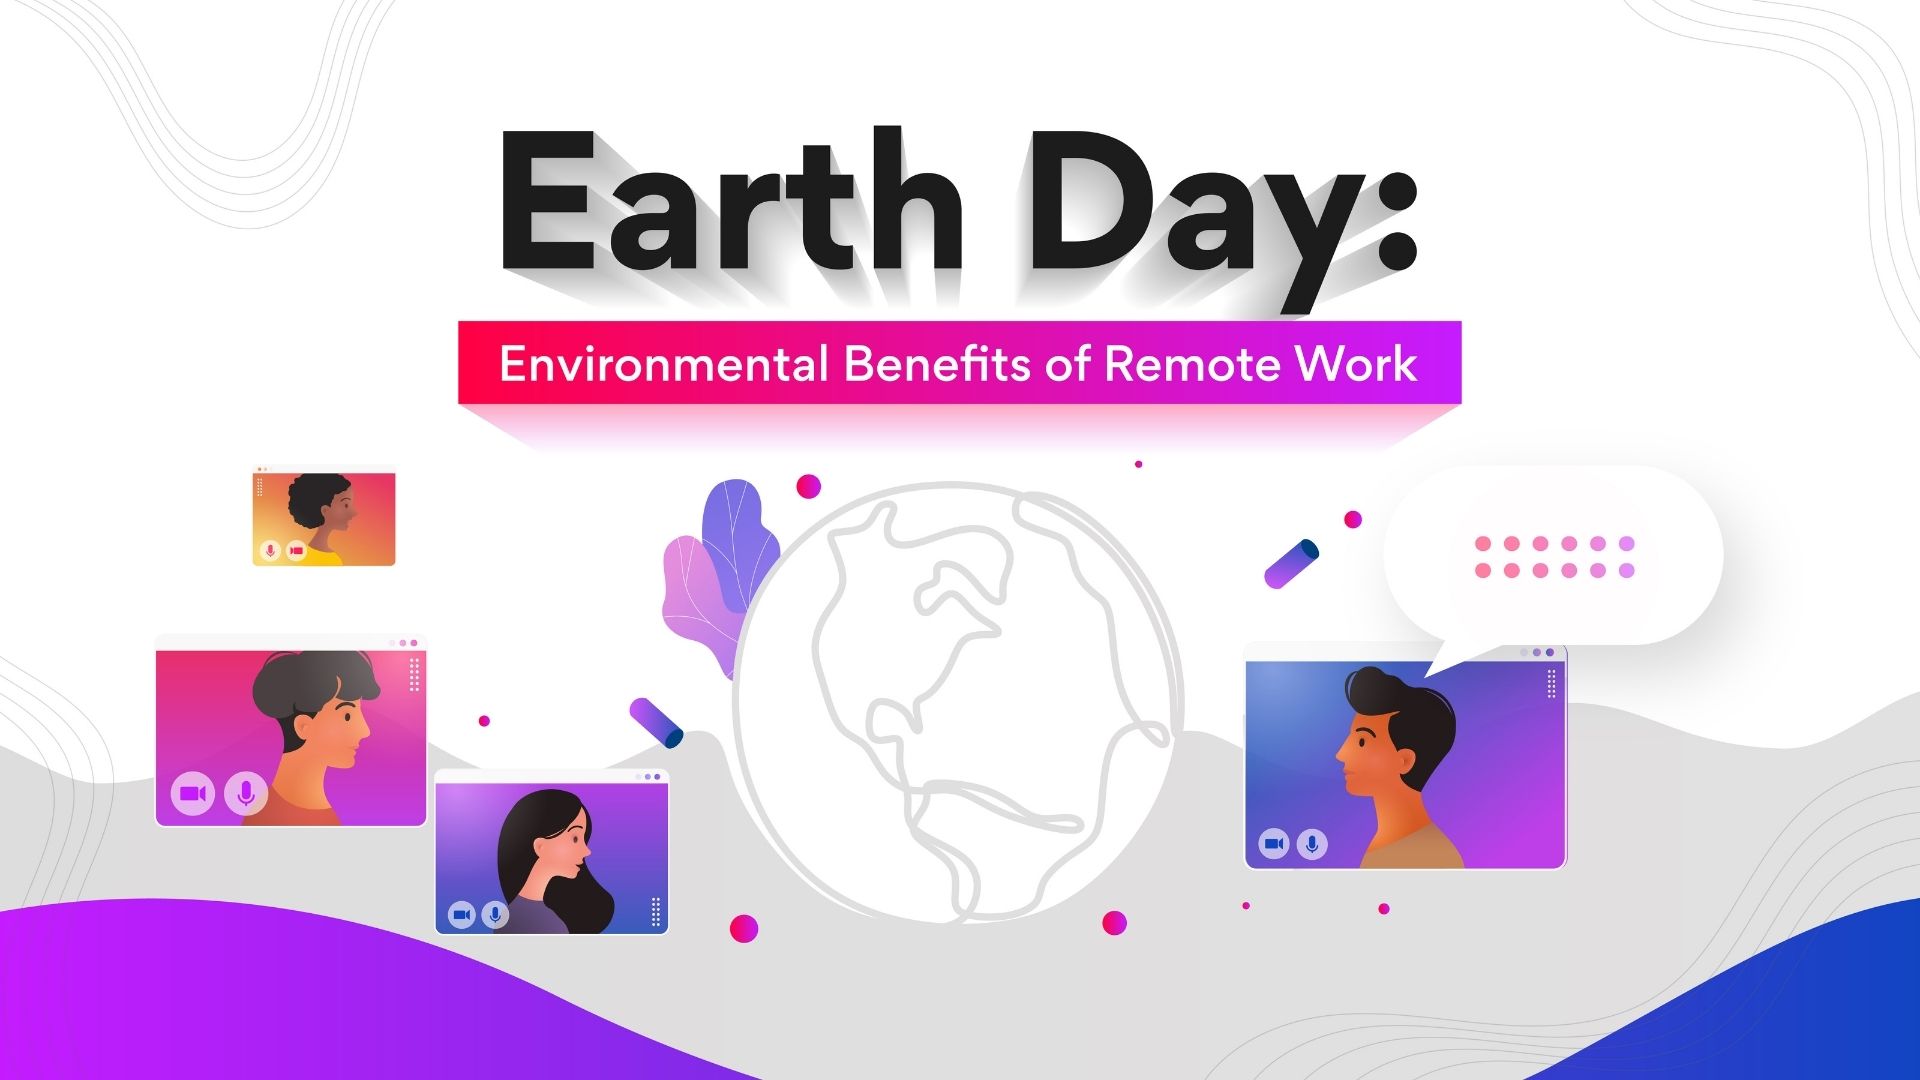 Earth day benefits of remote work